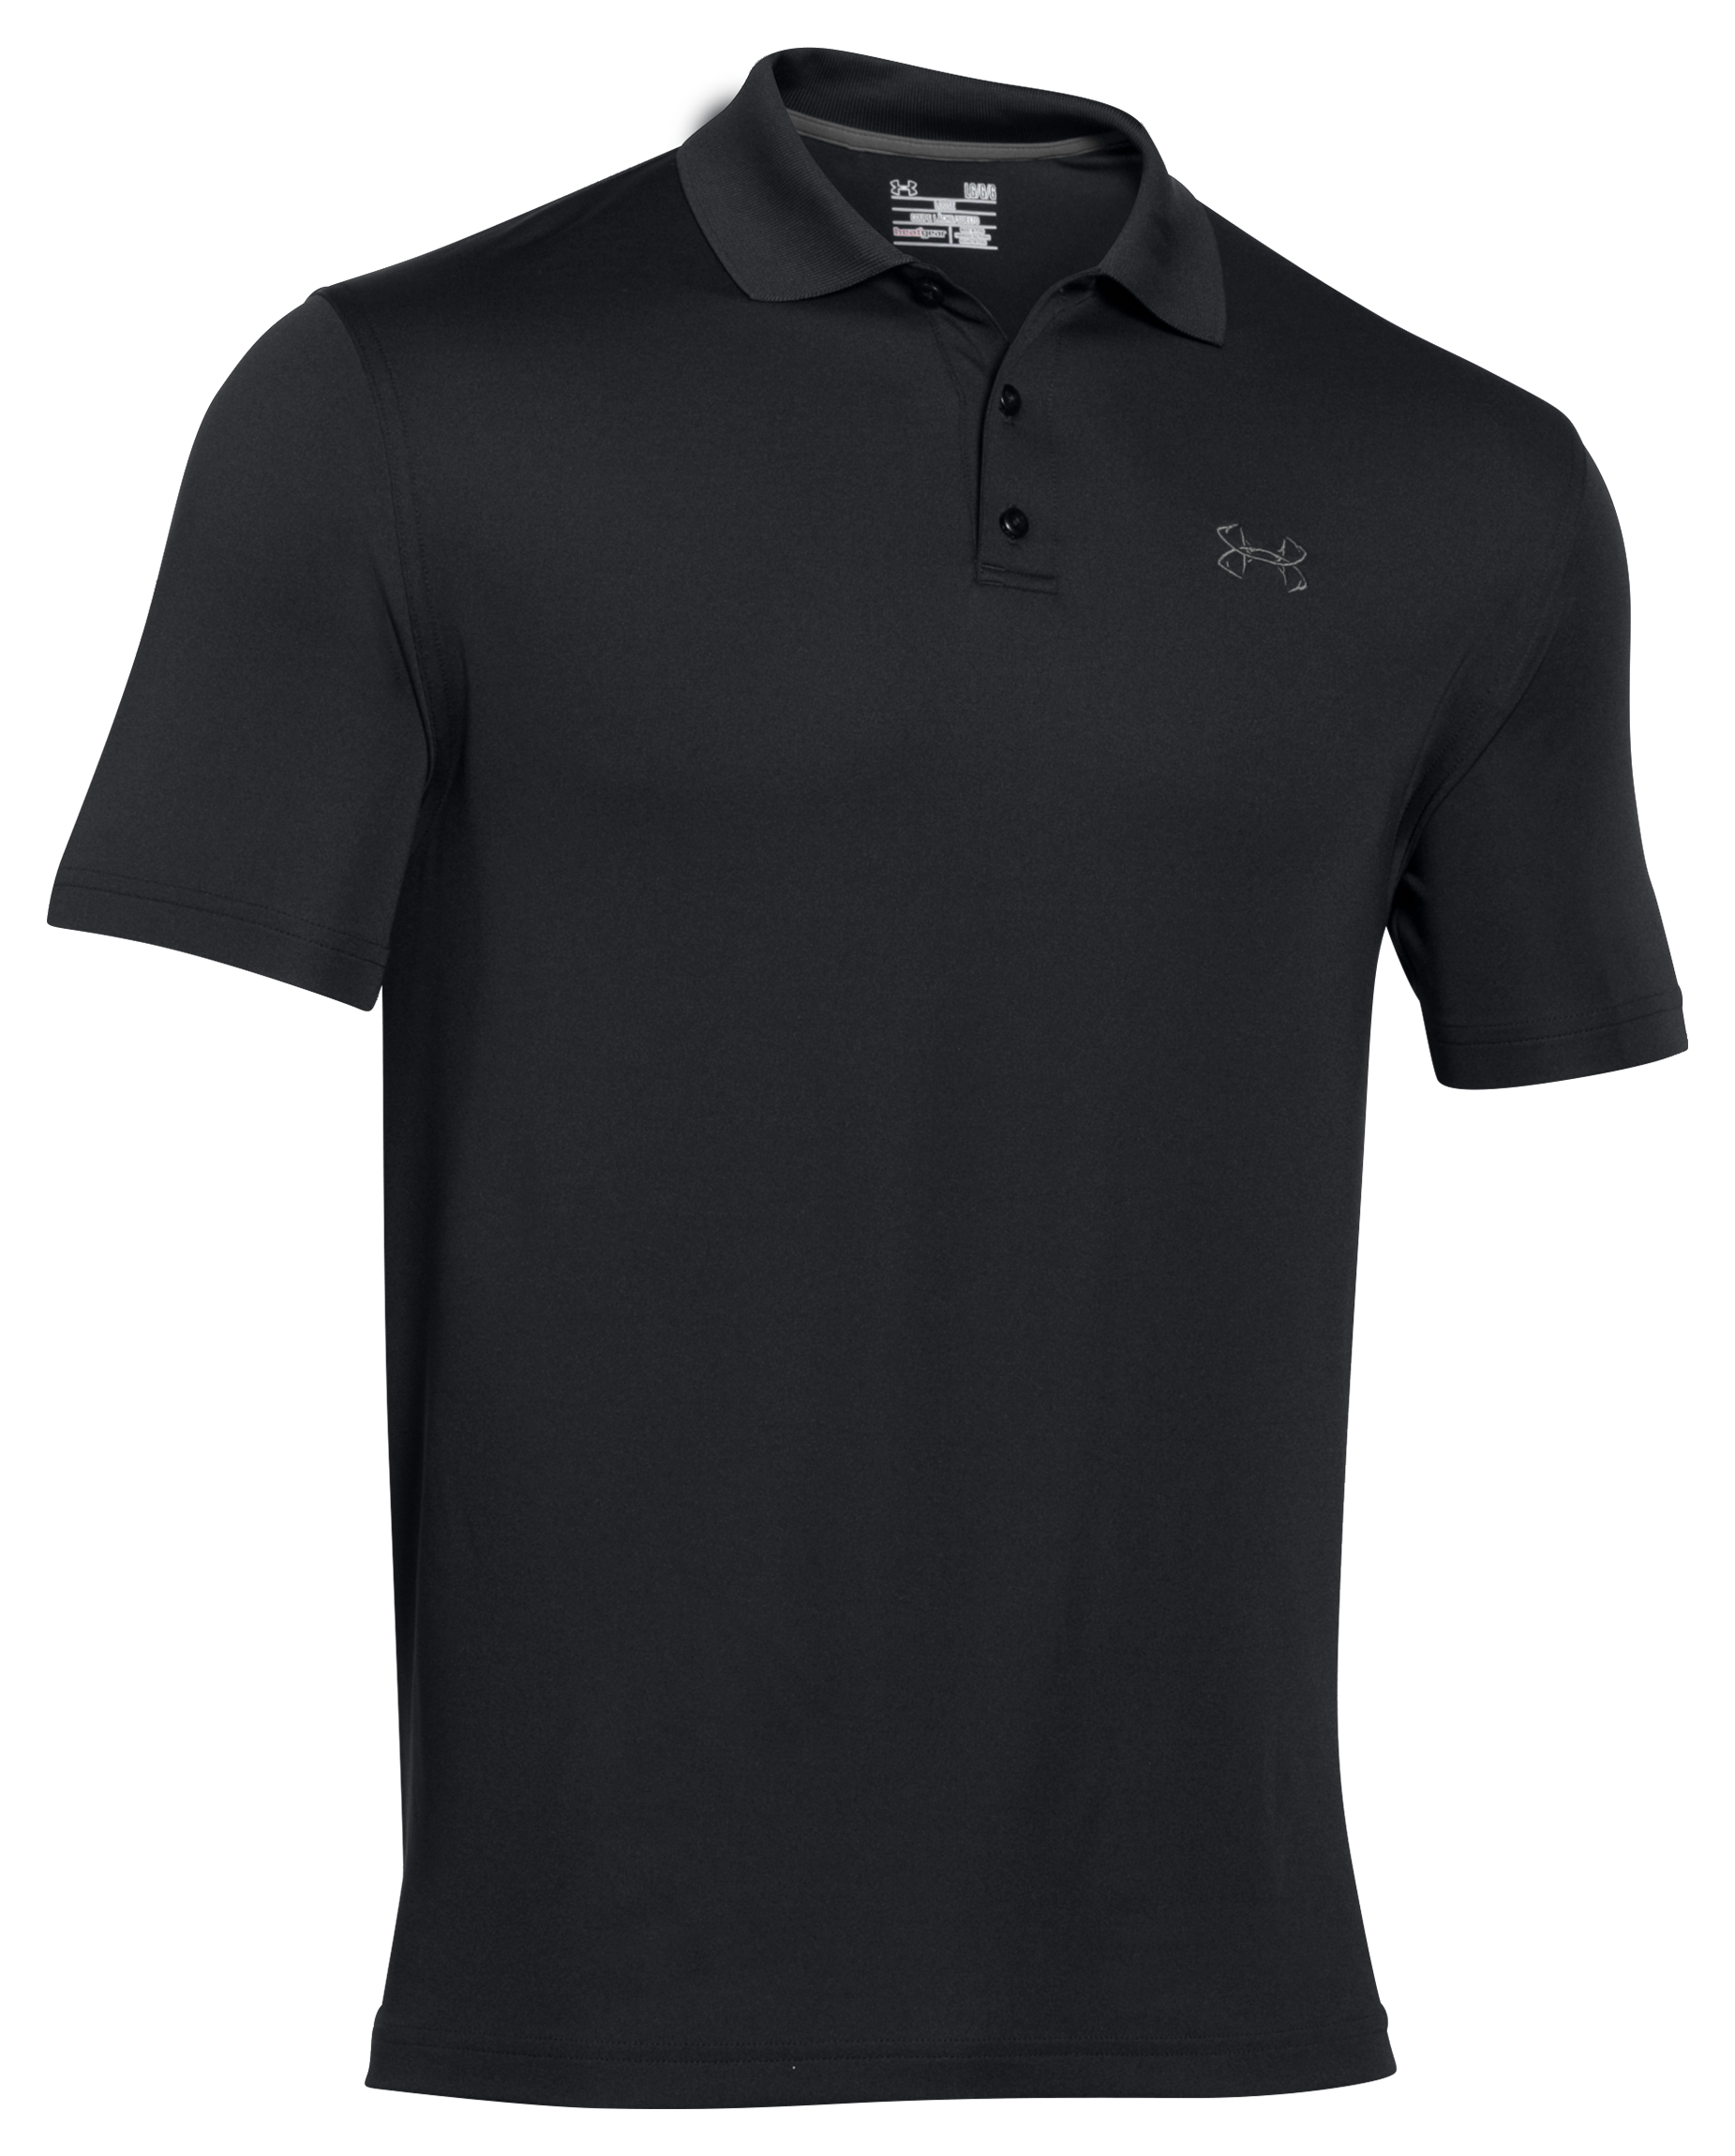 Under Armour Fish Hook Polo for Men